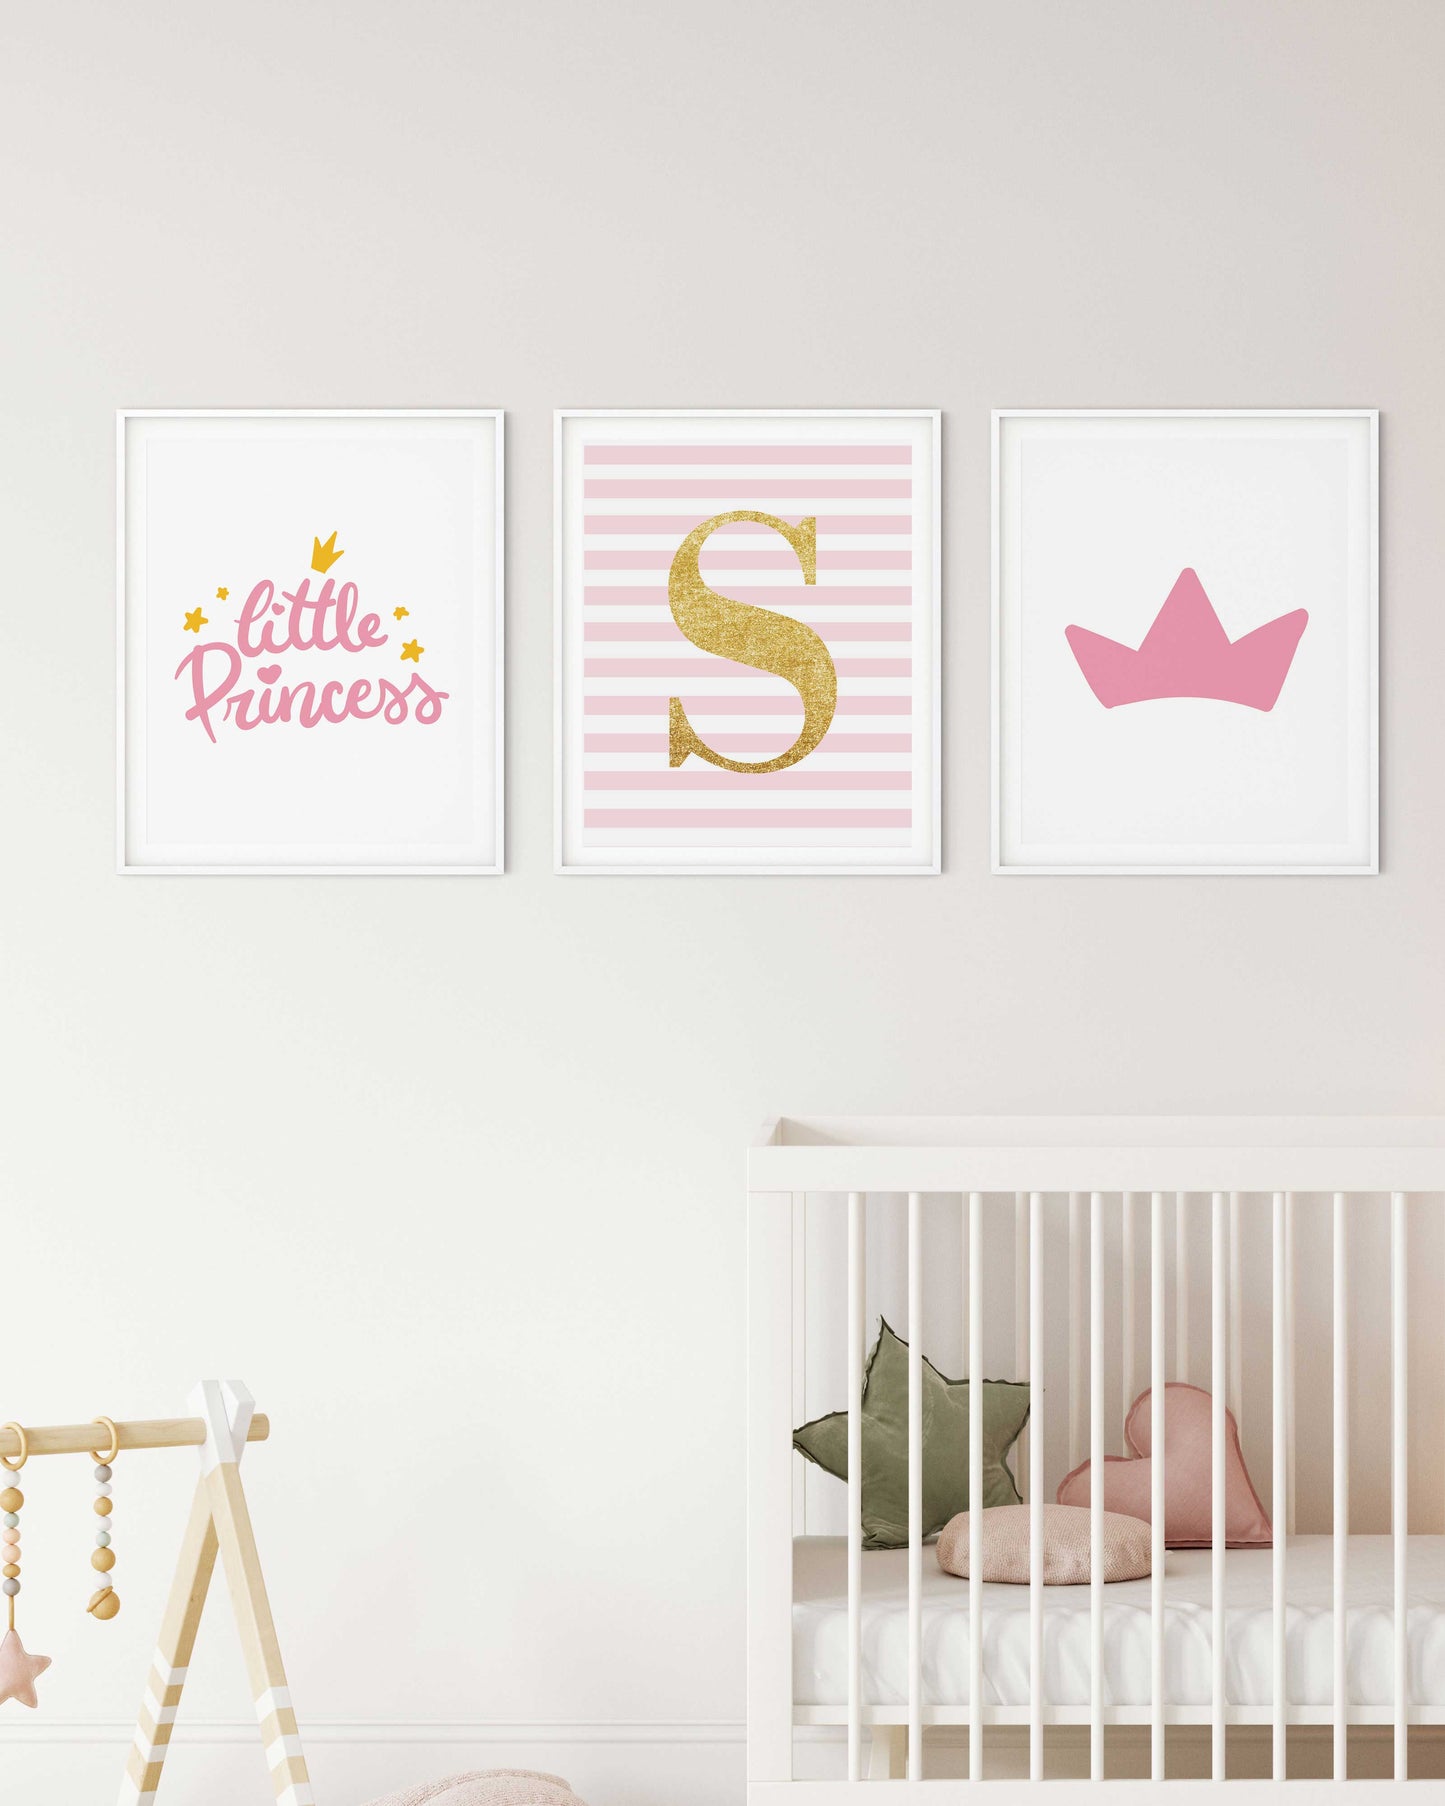 Little princess, set of 3 nursery Posters, personalized letter